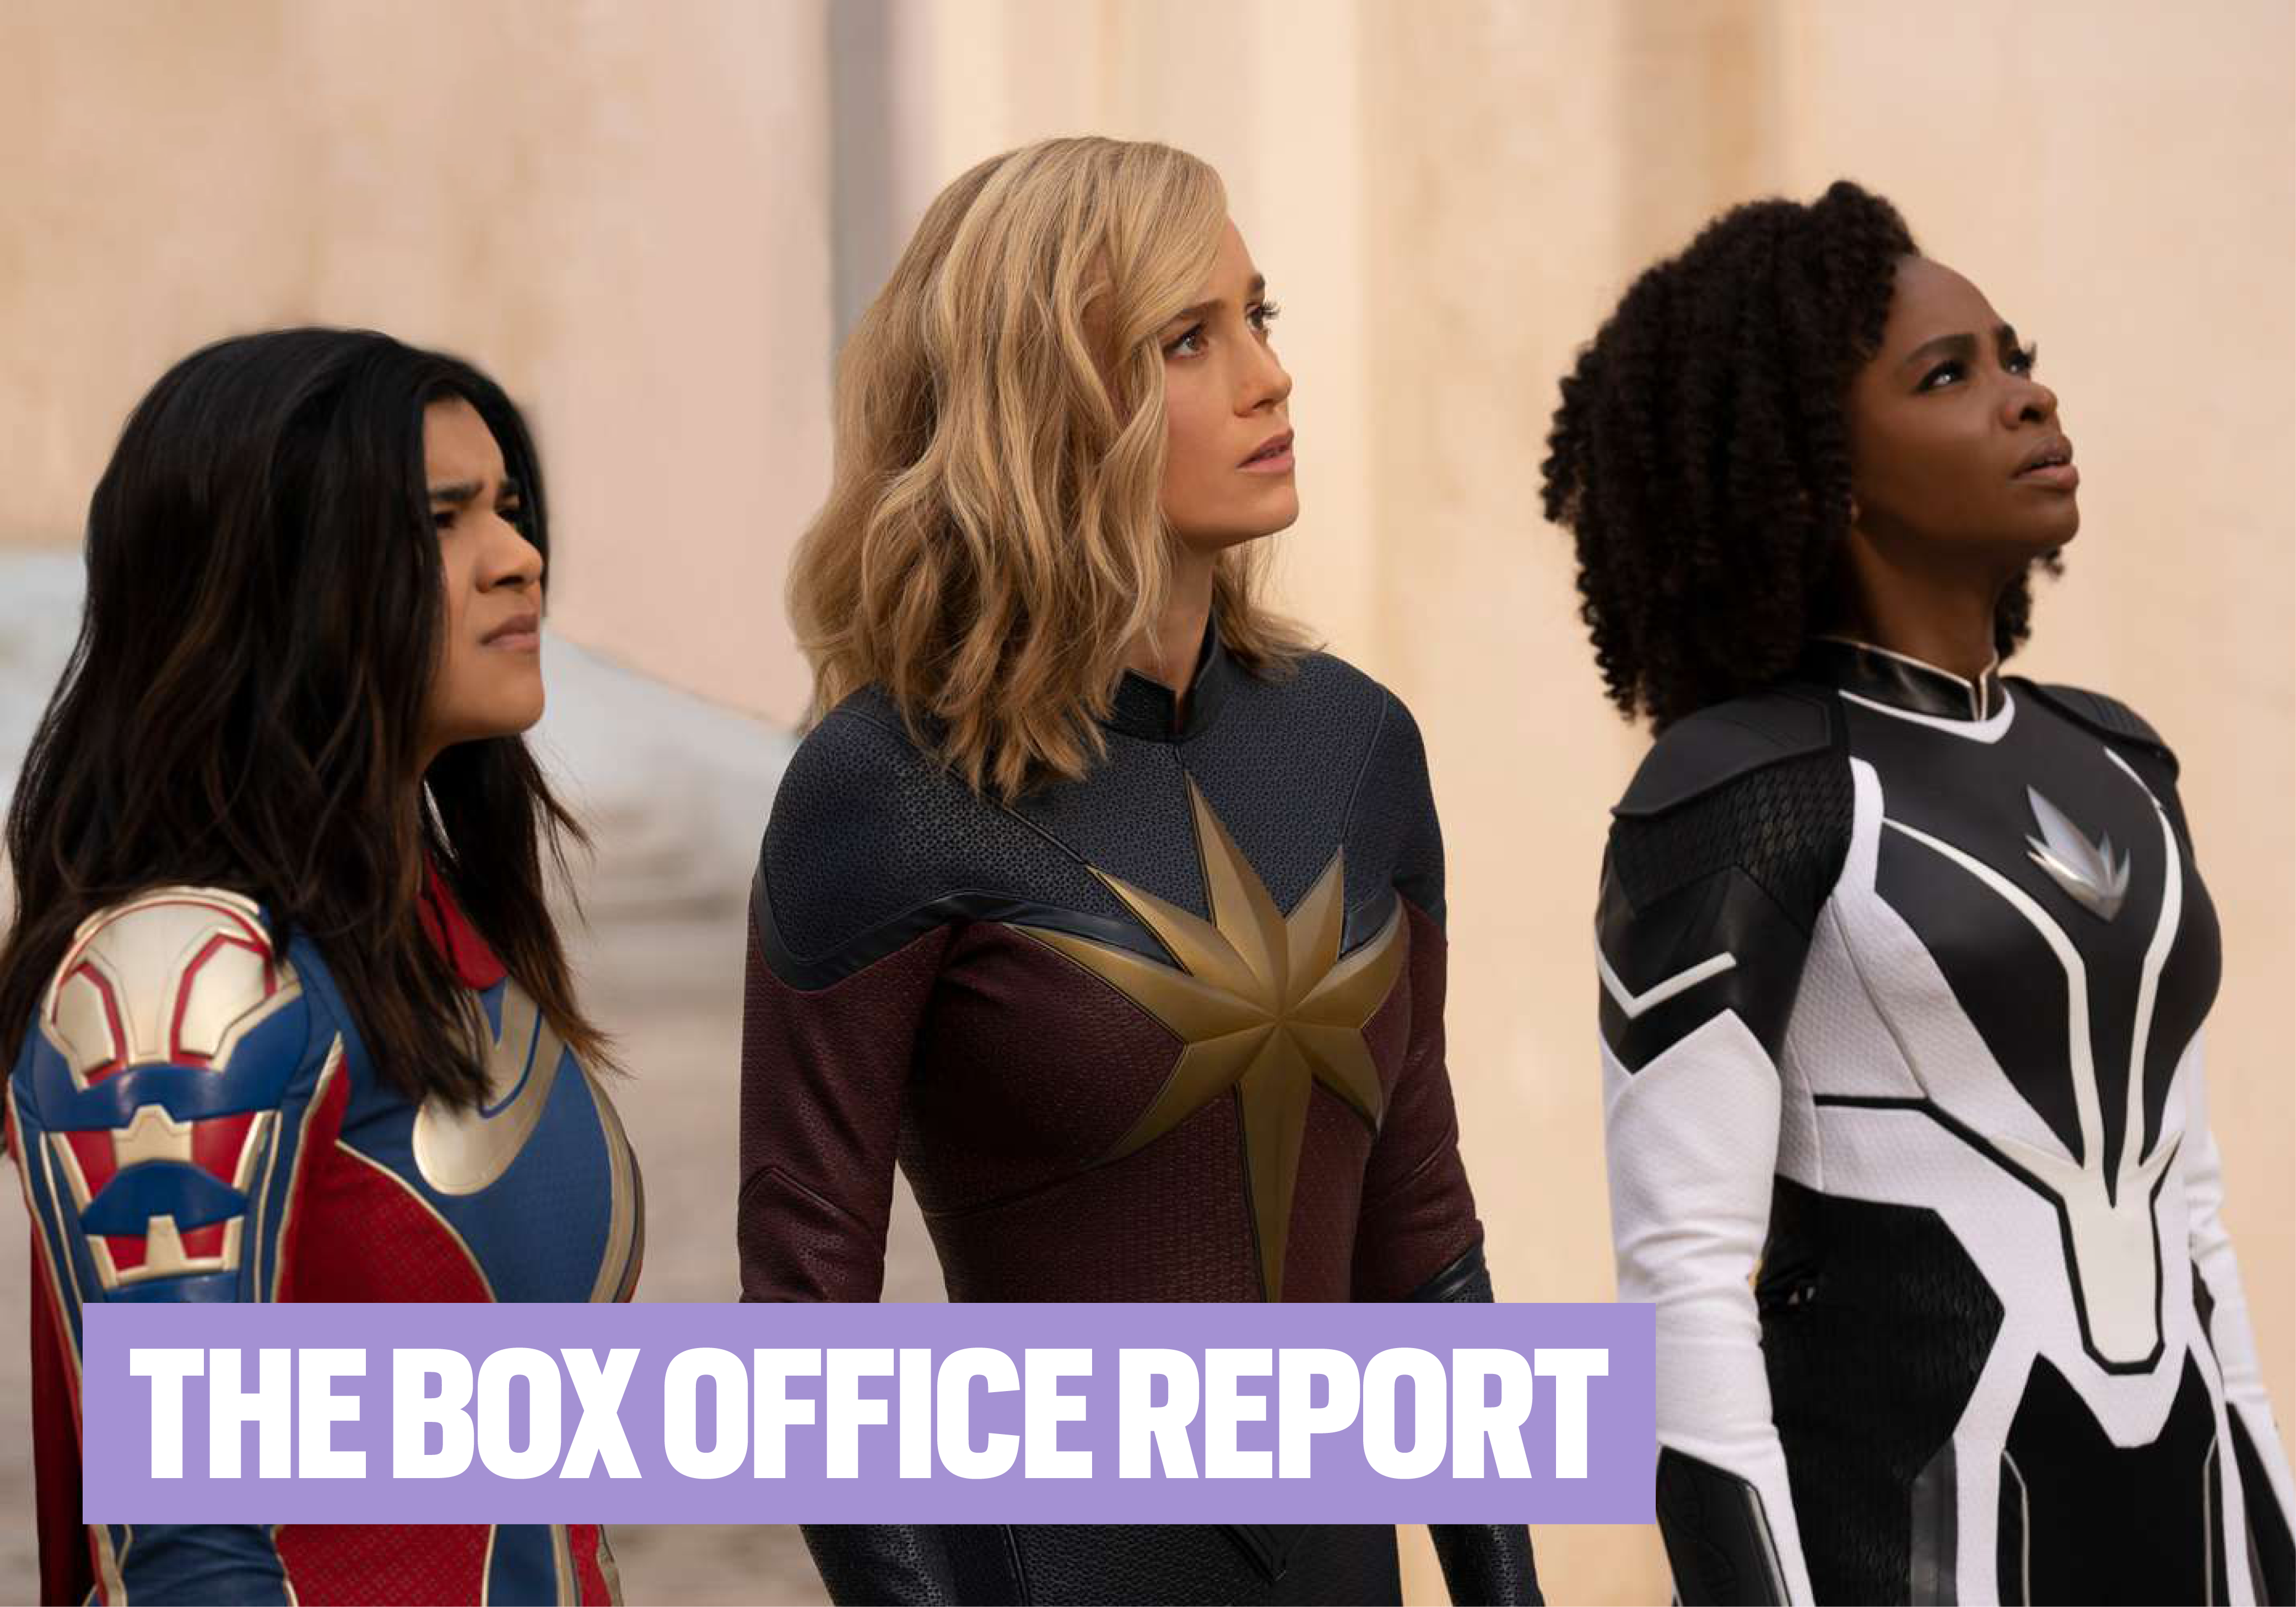 Ant-Man: Quantumania Box Office Numbers Are In, Is Marvel Happy?